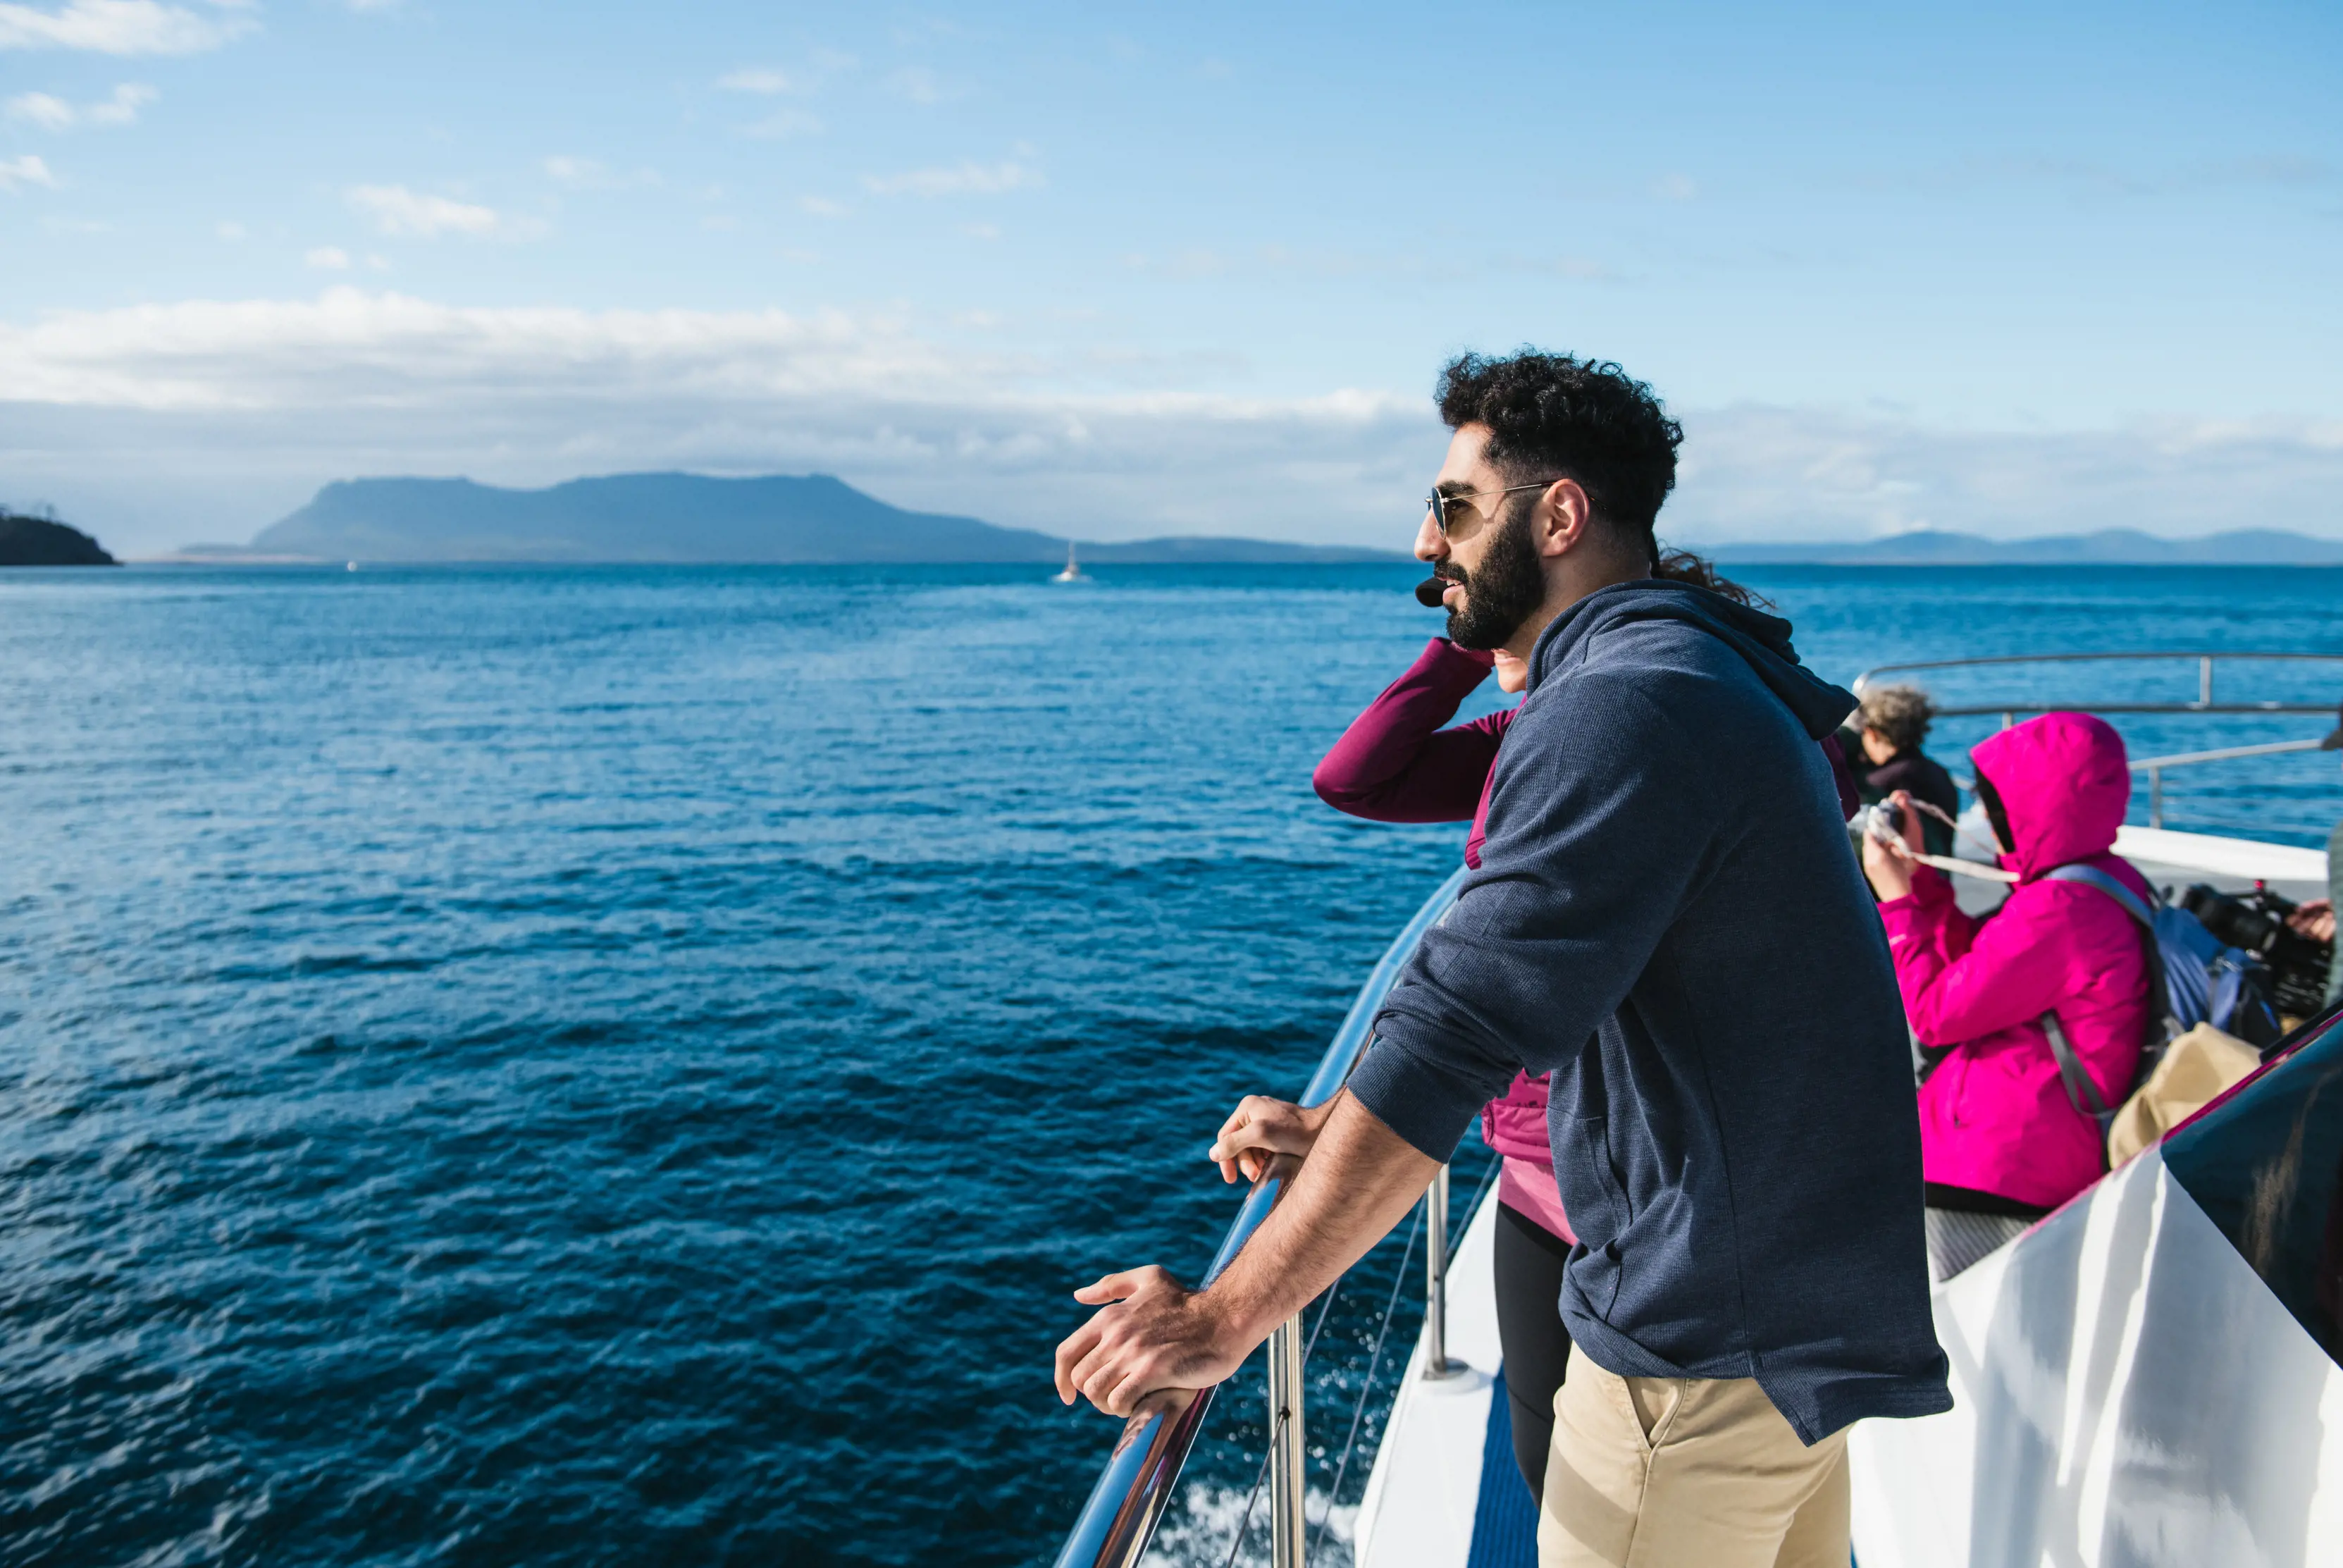 A group of people aboard the "Encounter Maria Island" ferry, sail across pristine, blue ocean, admiring the beautiful scenery.